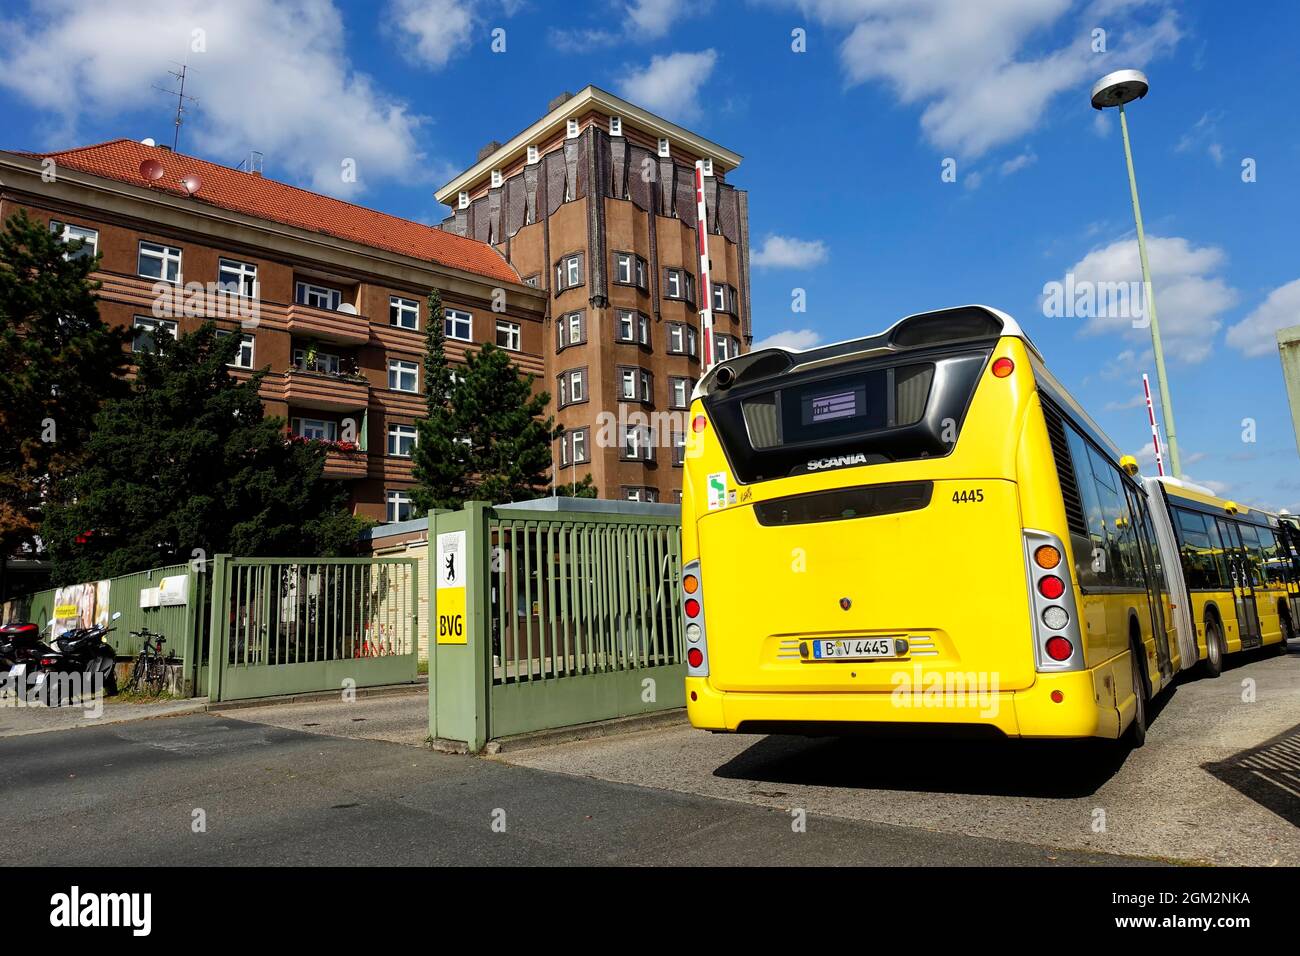 Depot of The BVG busses, Berlin, Germany Stock Photo